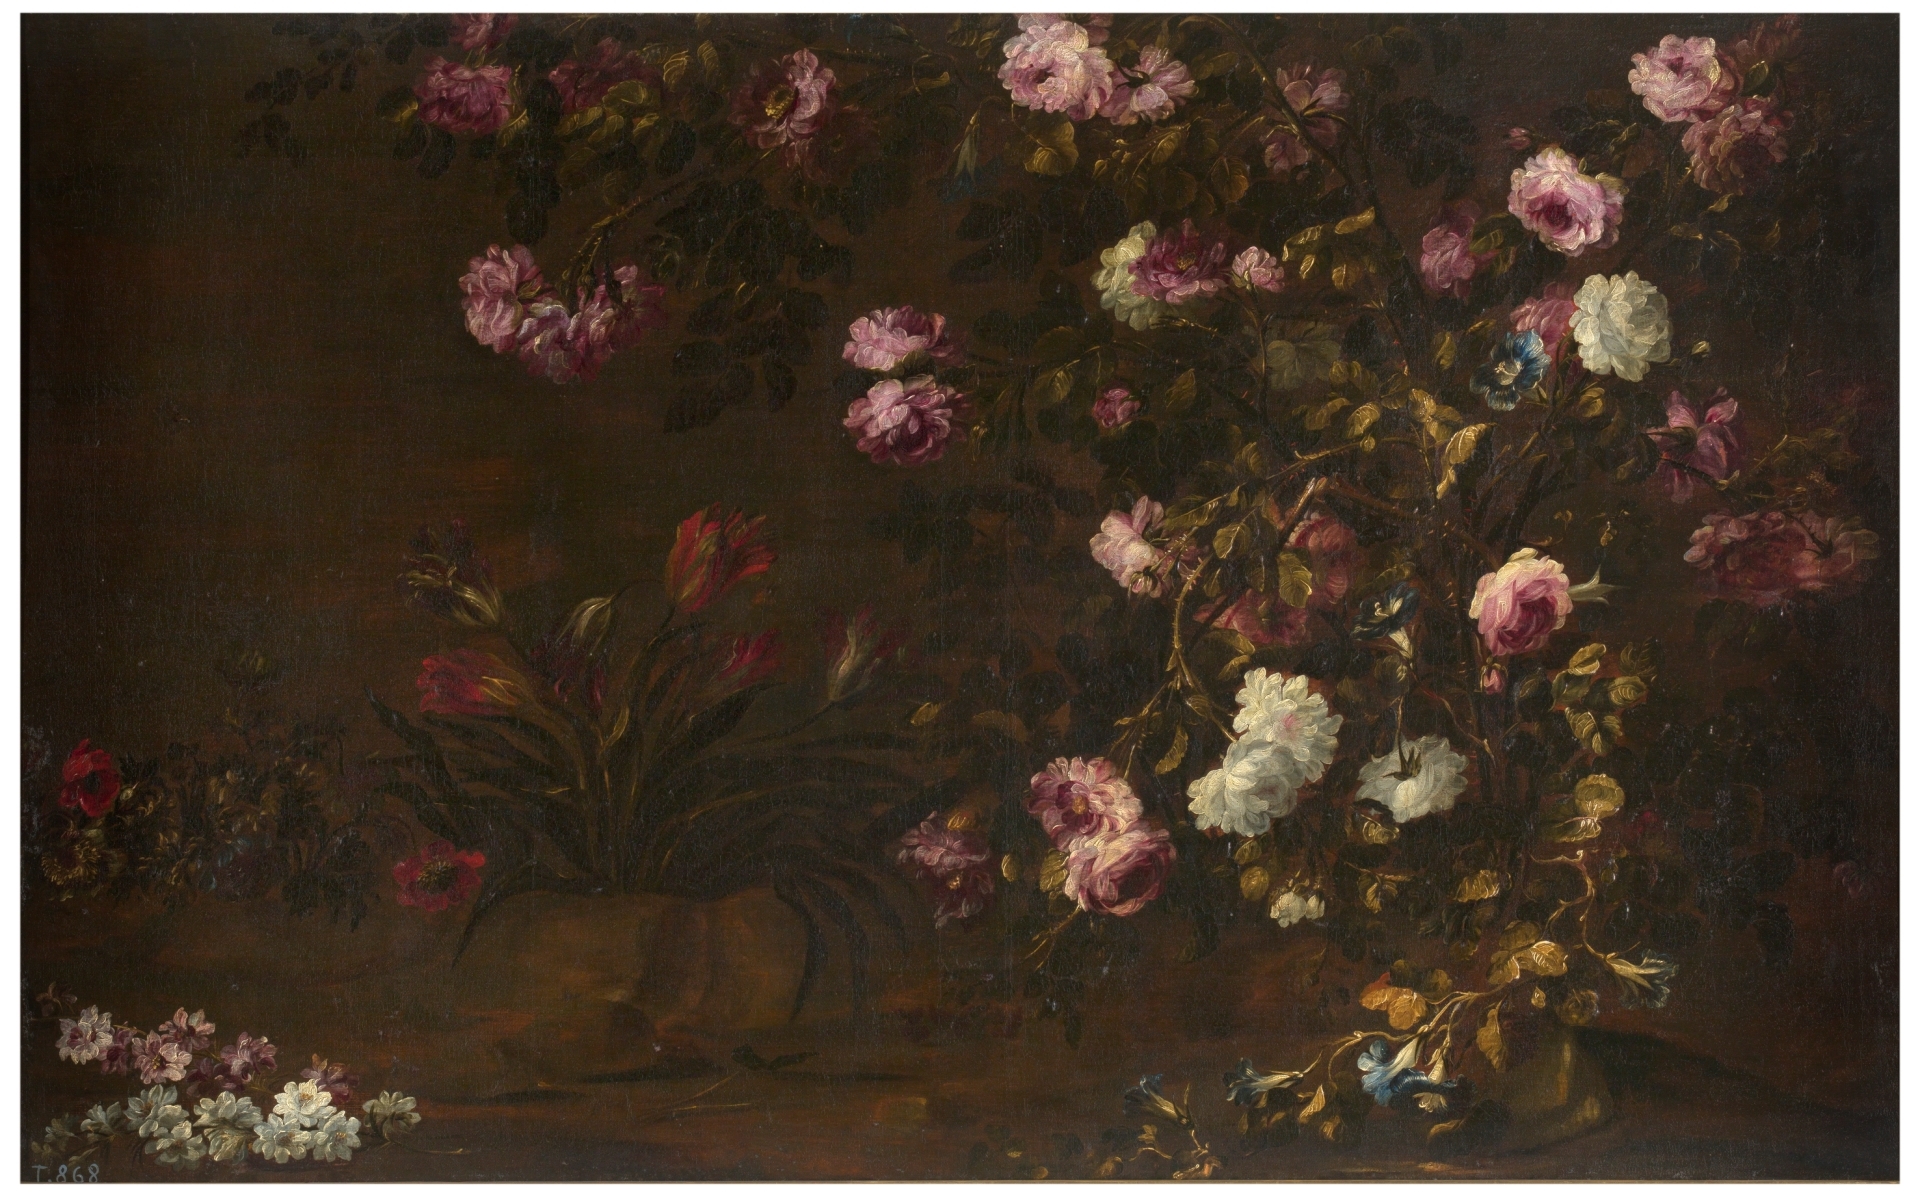 A floral still life with white and pink roses filling the entire composition. A smaller assortment of flowers in a vase is included on the left side of the canvas.